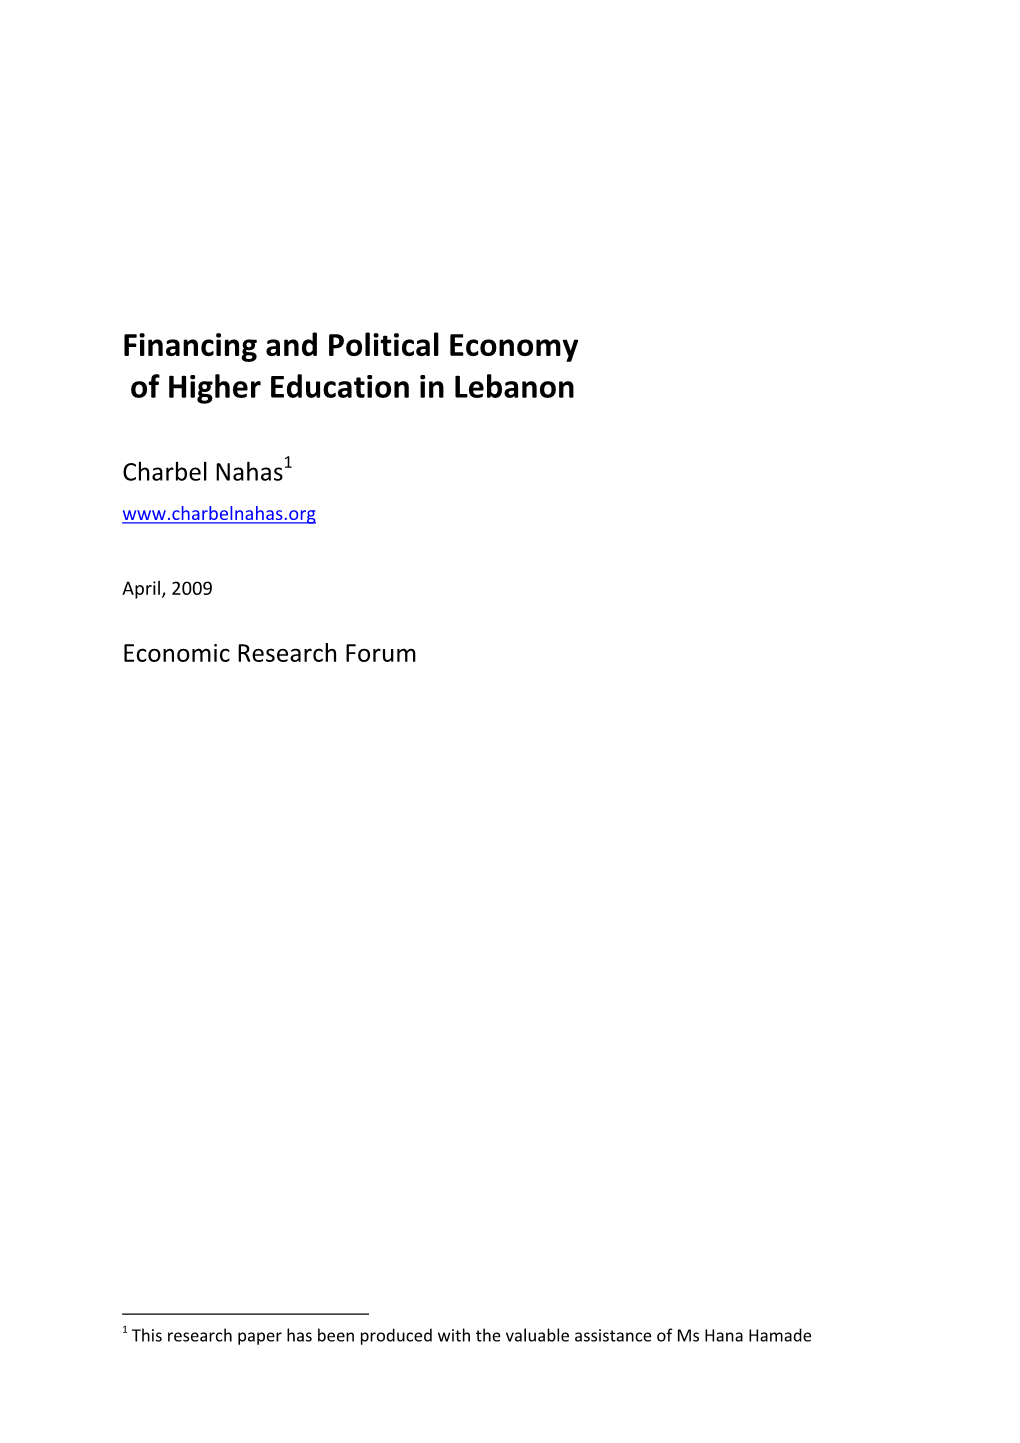 Financing and Political Economy of Higher Education in Lebanon